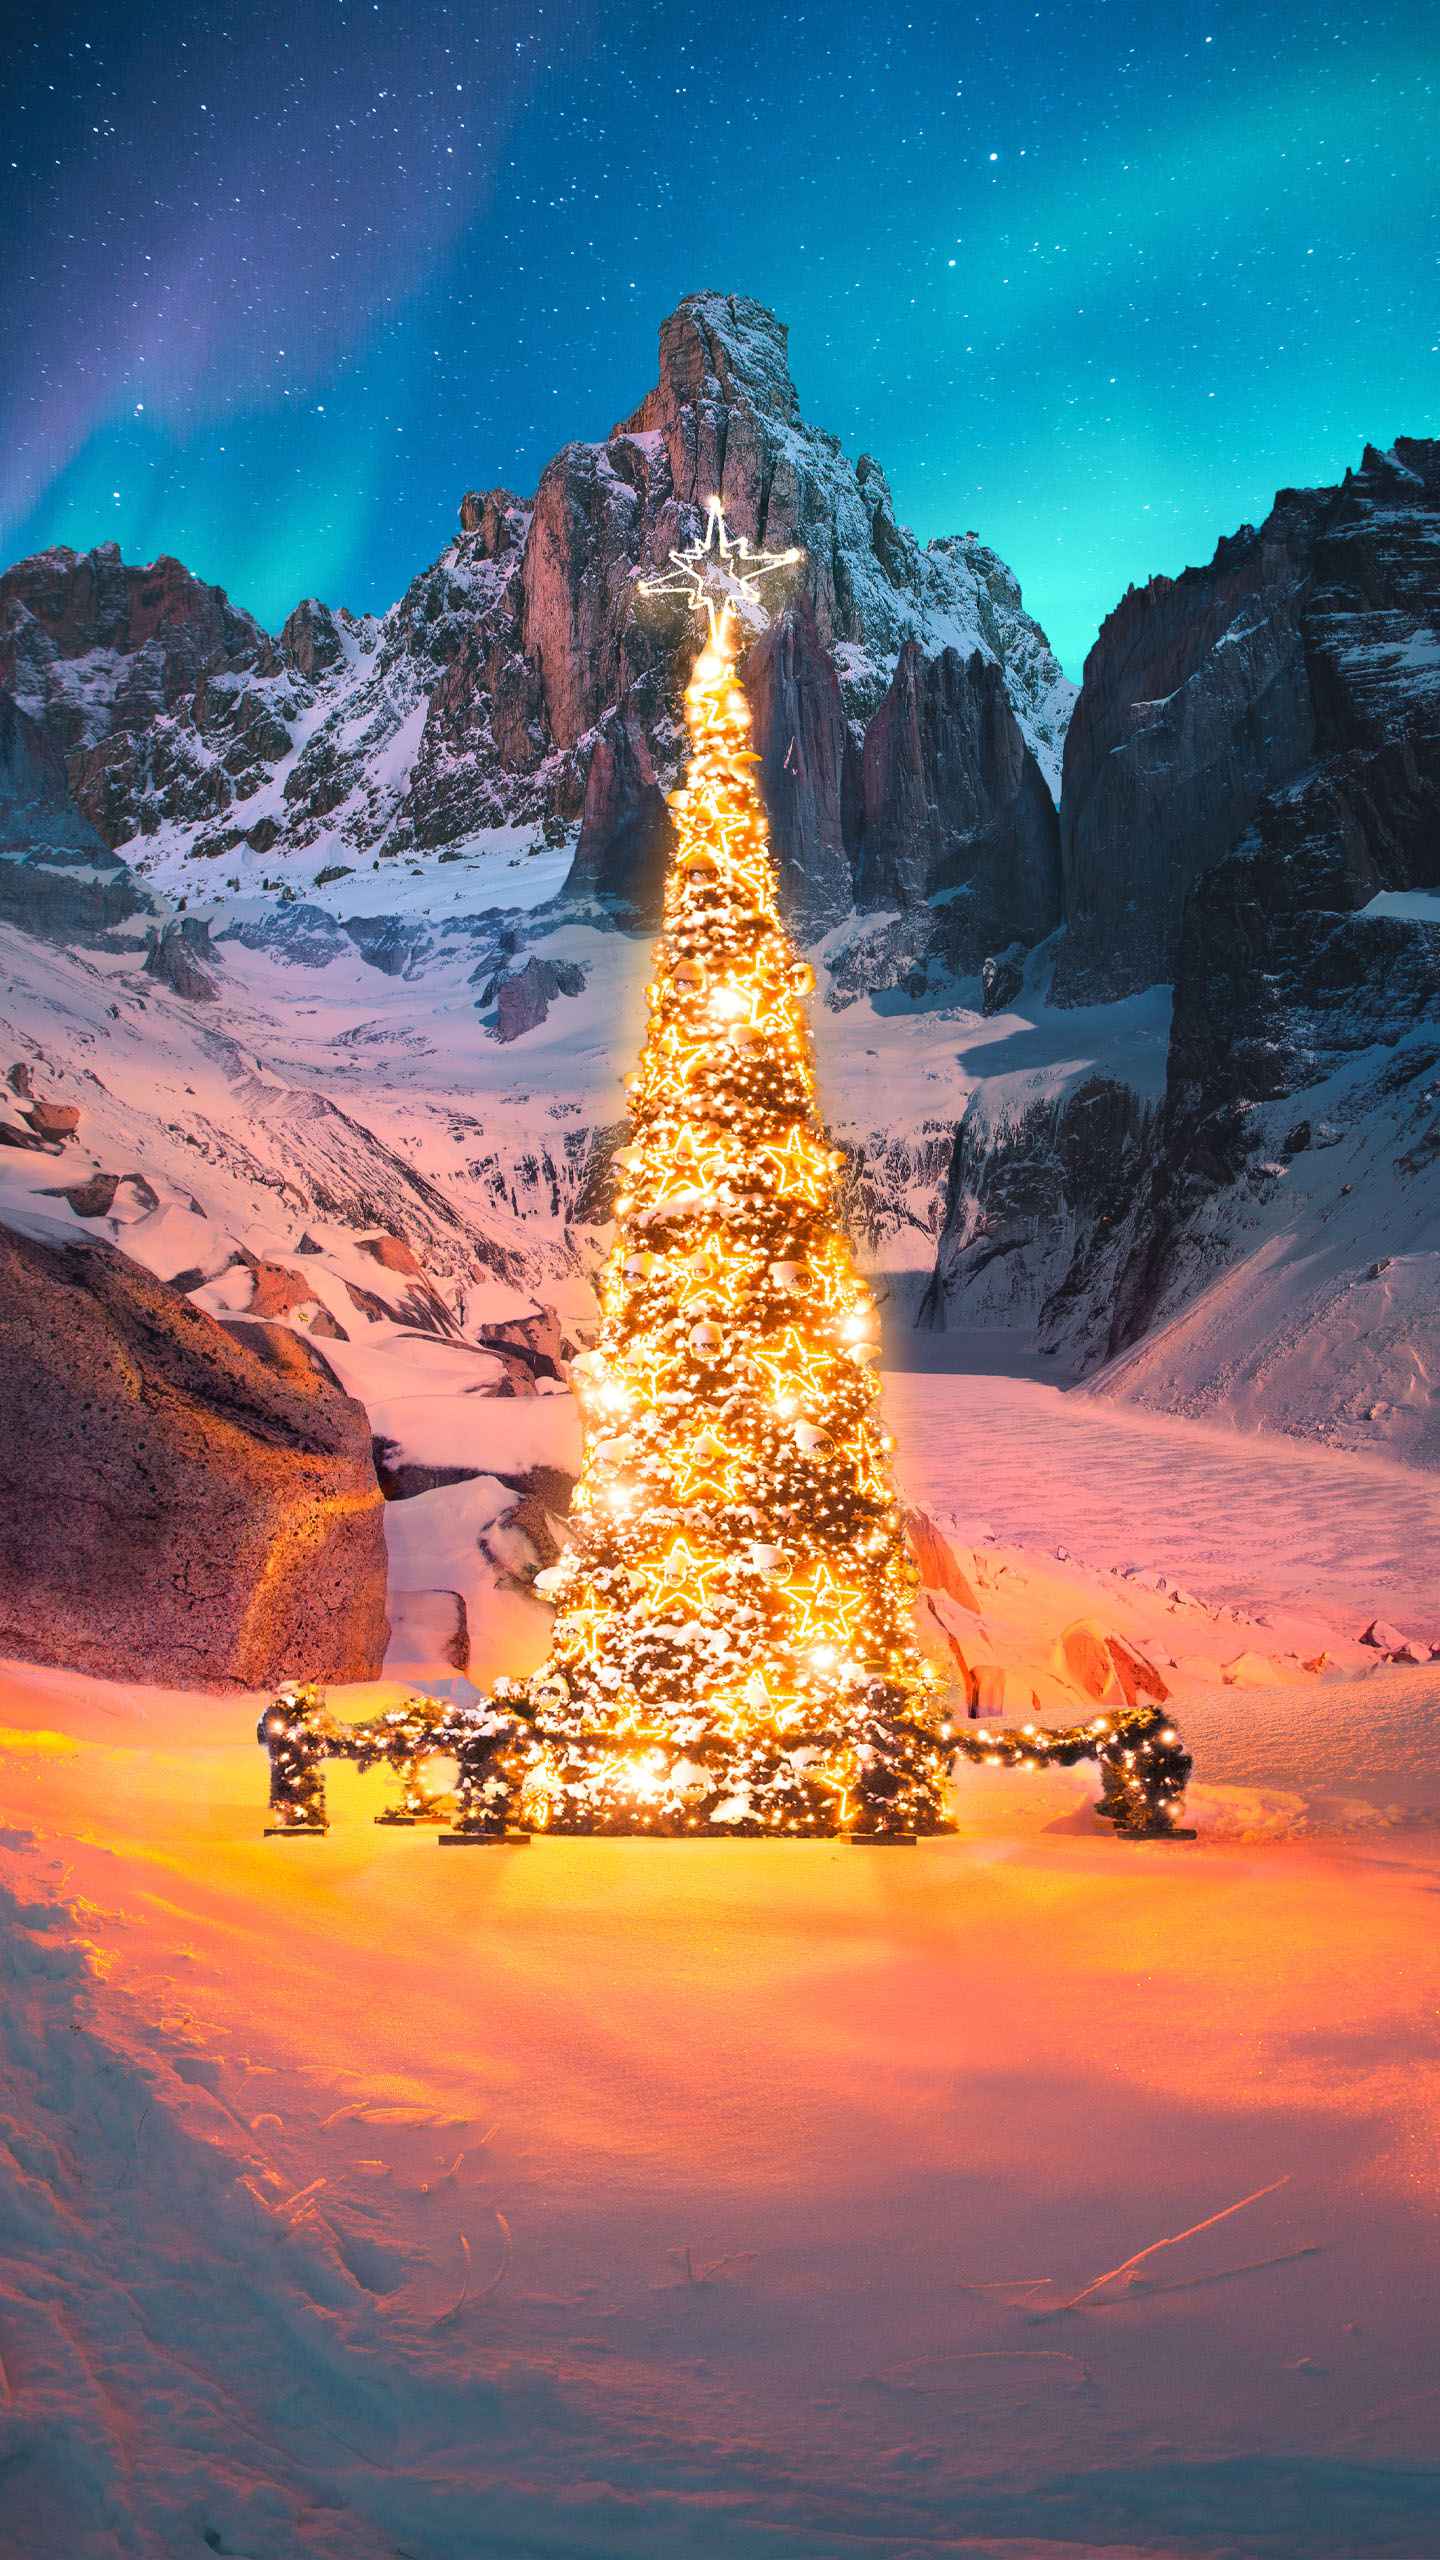 The Christmas Tree iPhone Wallpaper - iPhone Wallpapers